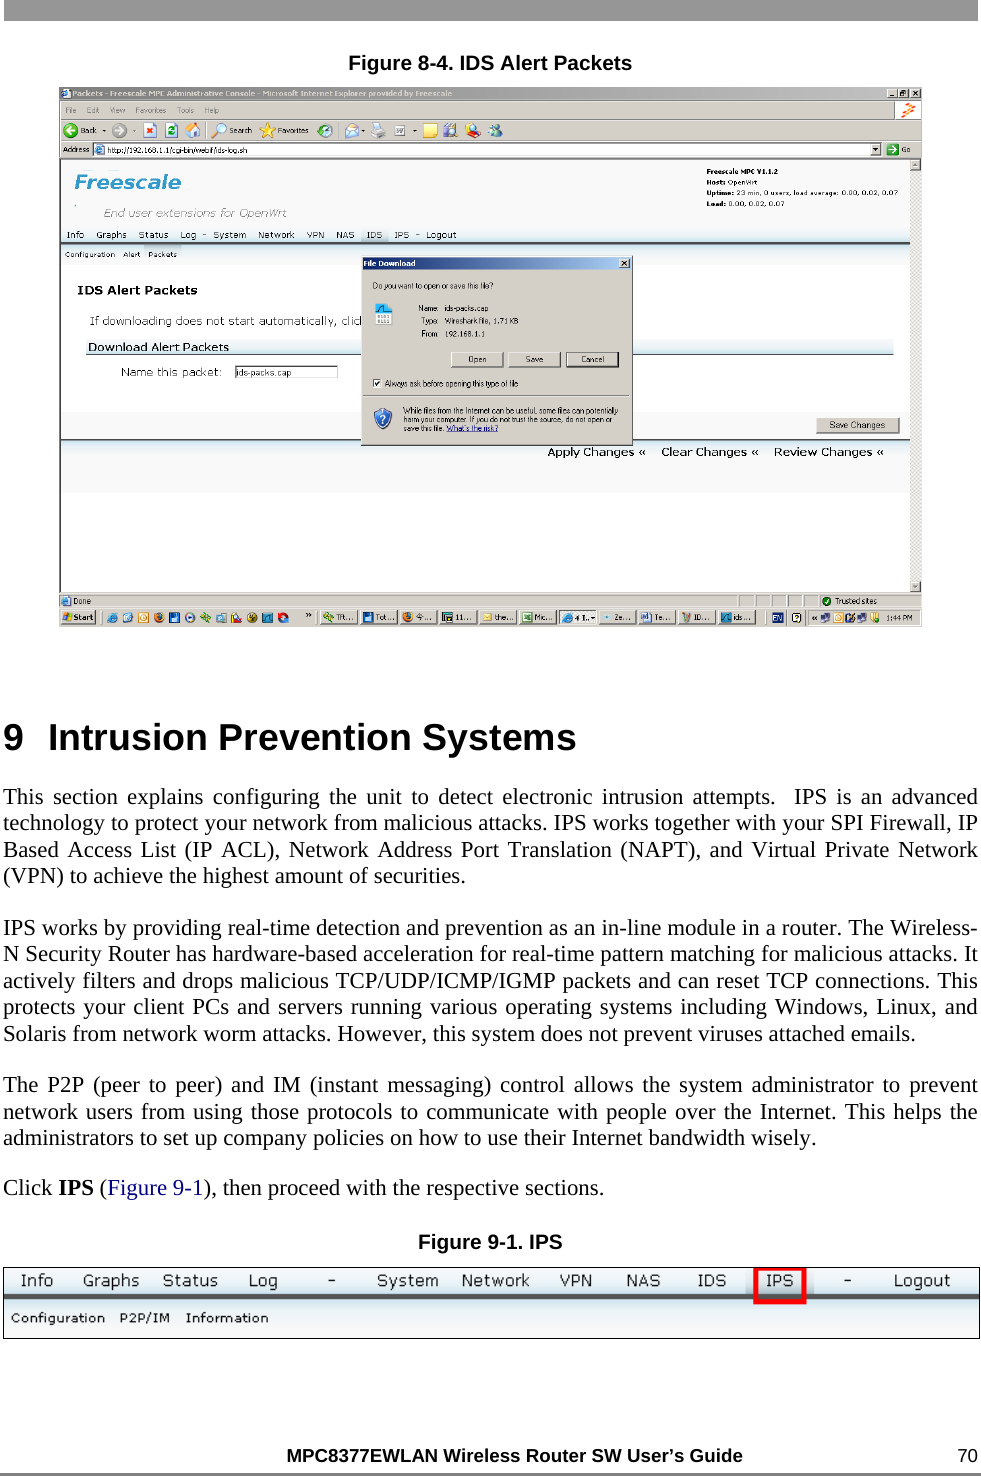                                                          MPC8377EWLAN Wireless Router SW User’s Guide    70 Figure 8-4. IDS Alert Packets  9  Intrusion Prevention Systems This section explains configuring the unit to detect electronic intrusion attempts.  IPS is an advanced technology to protect your network from malicious attacks. IPS works together with your SPI Firewall, IP Based Access List (IP ACL), Network Address Port Translation (NAPT), and Virtual Private Network (VPN) to achieve the highest amount of securities. IPS works by providing real-time detection and prevention as an in-line module in a router. The Wireless-N Security Router has hardware-based acceleration for real-time pattern matching for malicious attacks. It actively filters and drops malicious TCP/UDP/ICMP/IGMP packets and can reset TCP connections. This protects your client PCs and servers running various operating systems including Windows, Linux, and Solaris from network worm attacks. However, this system does not prevent viruses attached emails. The P2P (peer to peer) and IM (instant messaging) control allows the system administrator to prevent network users from using those protocols to communicate with people over the Internet. This helps the administrators to set up company policies on how to use their Internet bandwidth wisely. Click IPS (Figure 9-1), then proceed with the respective sections. Figure 9-1. IPS  